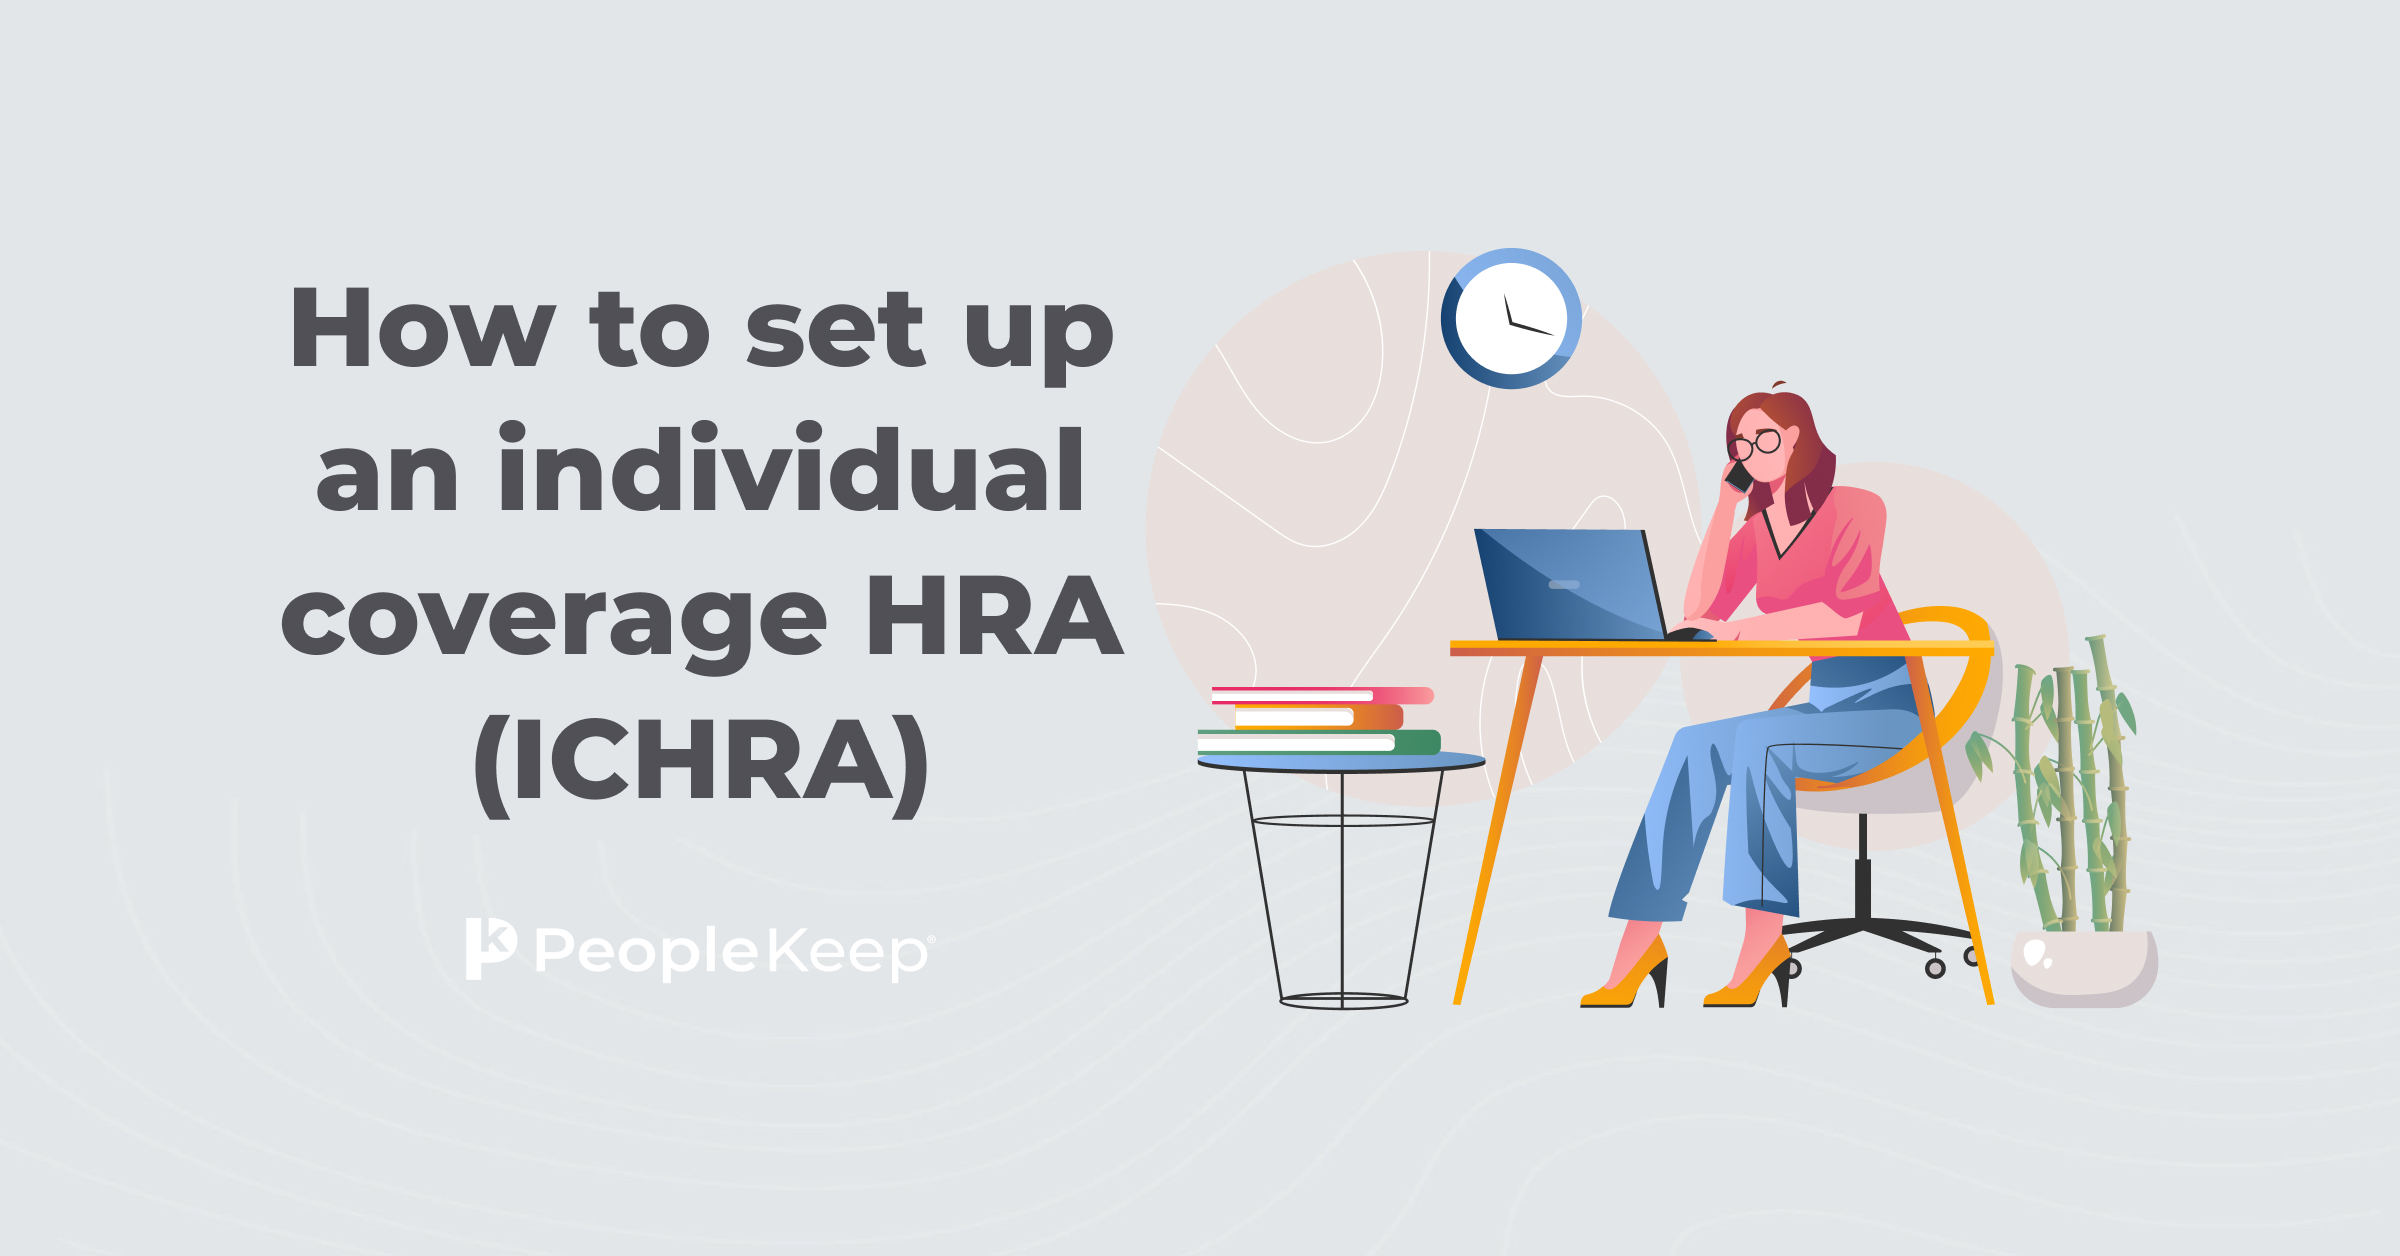 HRA Store: Find HRA Eligible Products Online